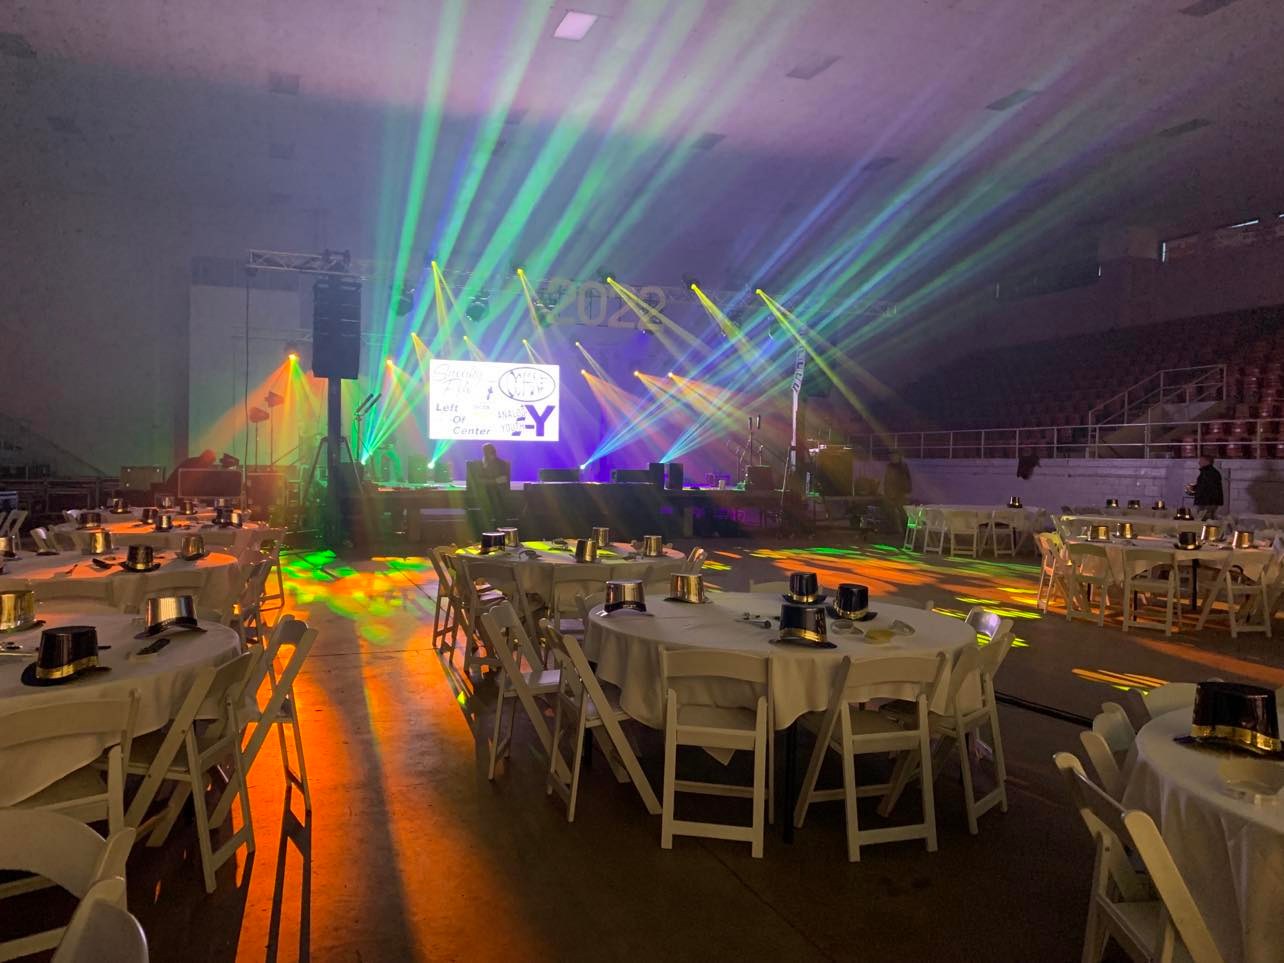 stage lights, sound equipment, and decorated tables with chairs